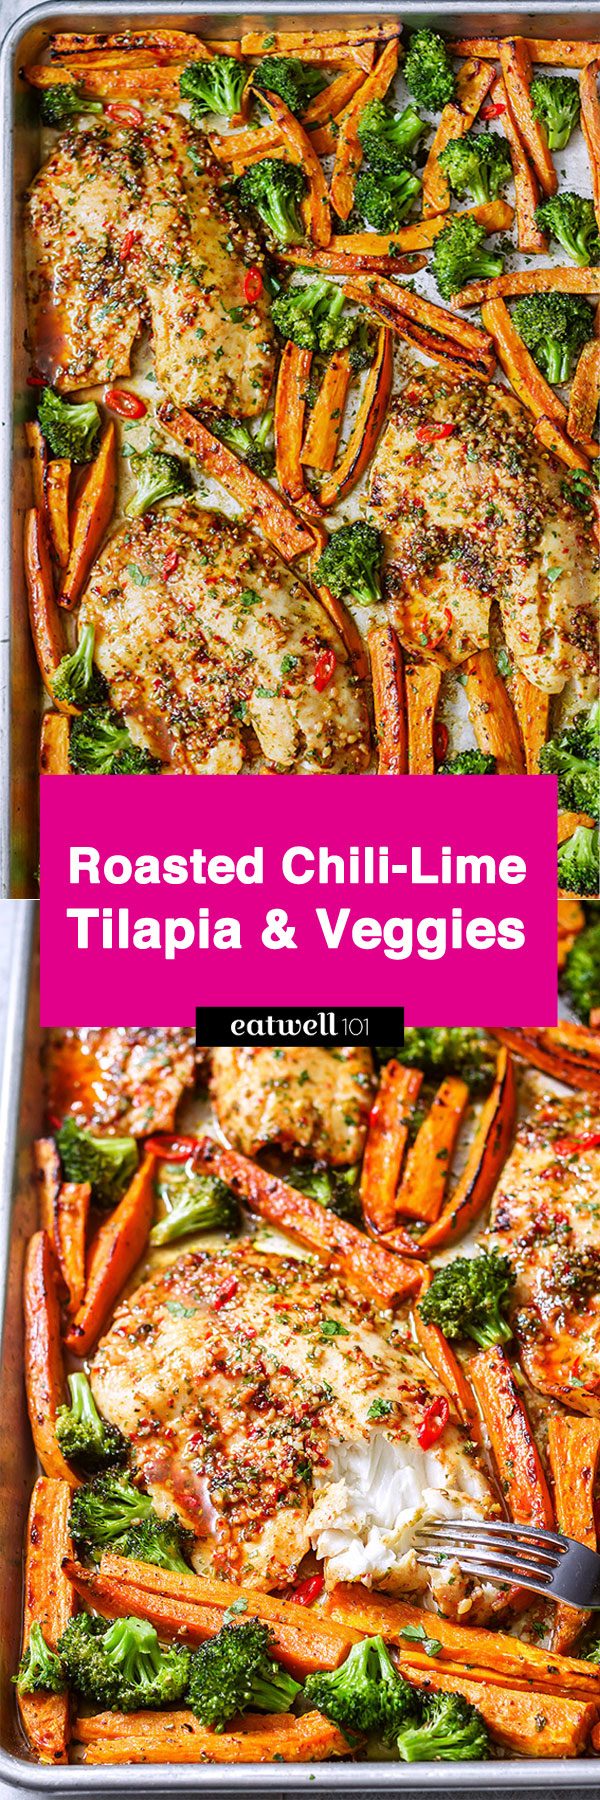 Sheet-Pan Chili-Lime Tilapia Recipe with Veggies - #eatwell101 #recipe #fish #sheetpan #dinner - A super easy, quick, and healthy sheet-pan meal for busy weeknights!